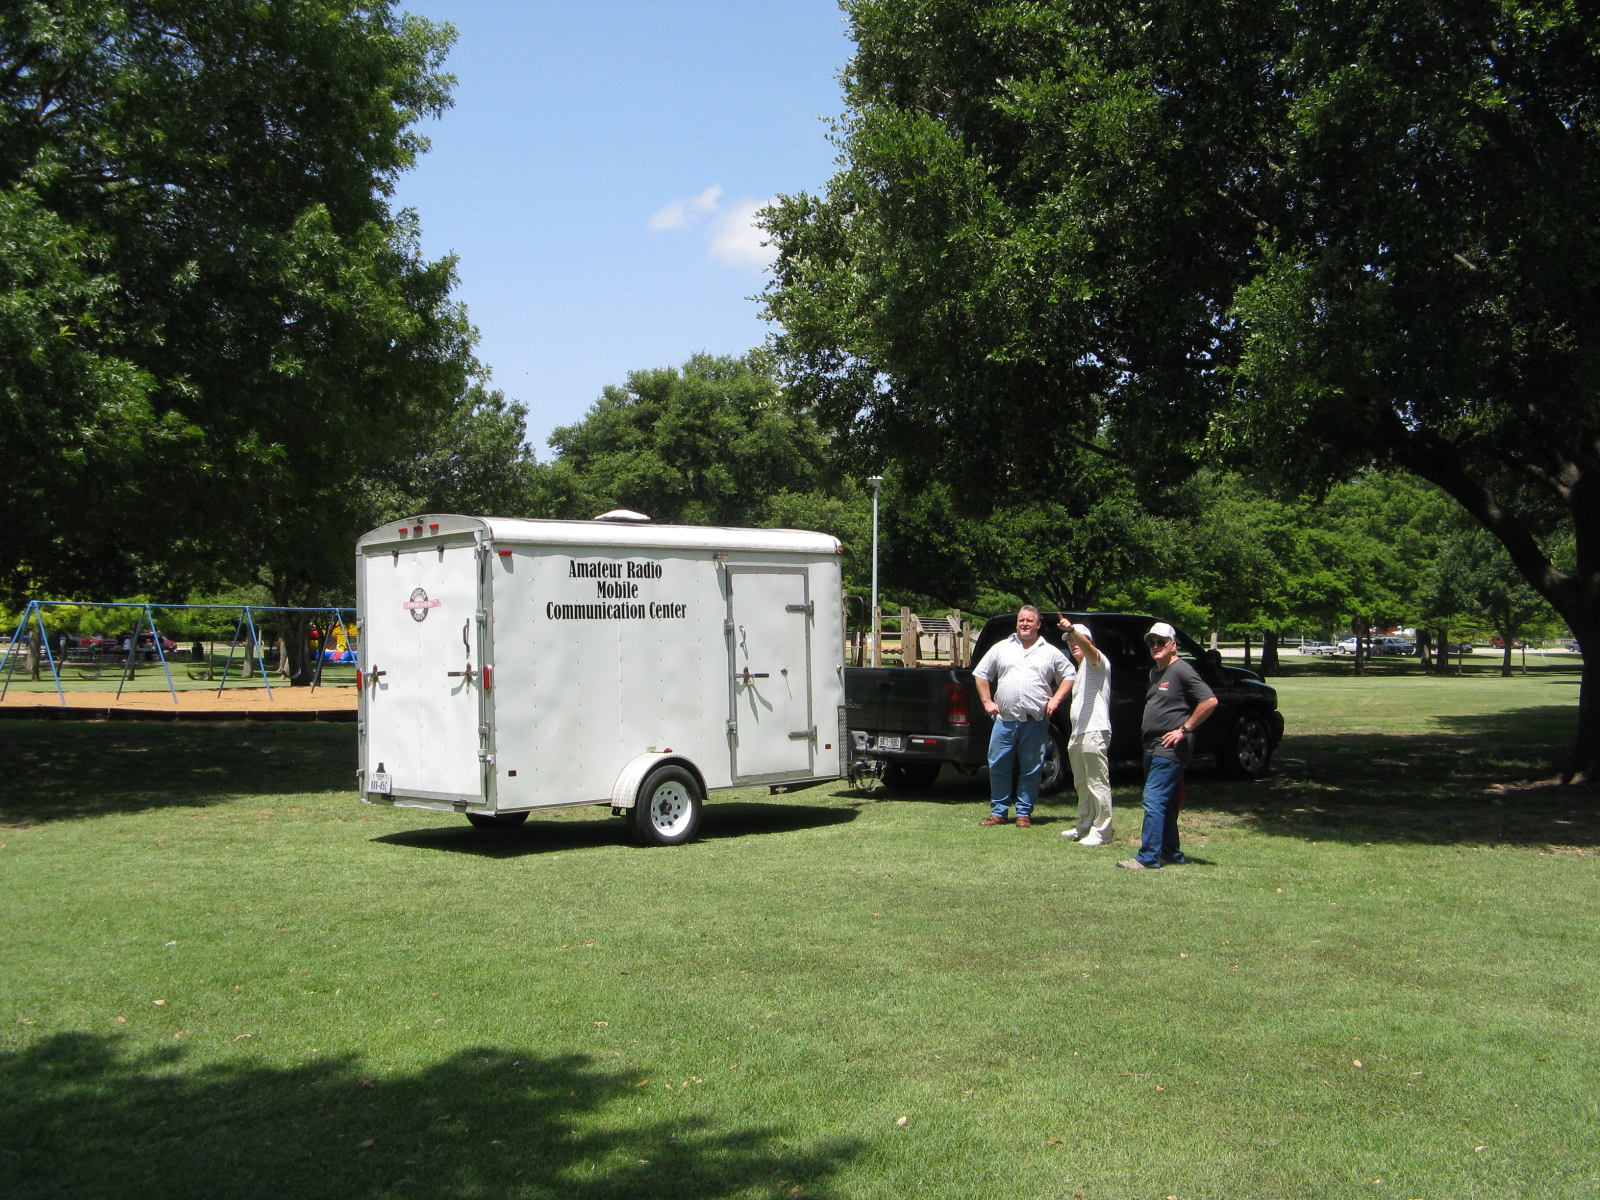 Don, James, and Perry with the communications trailer